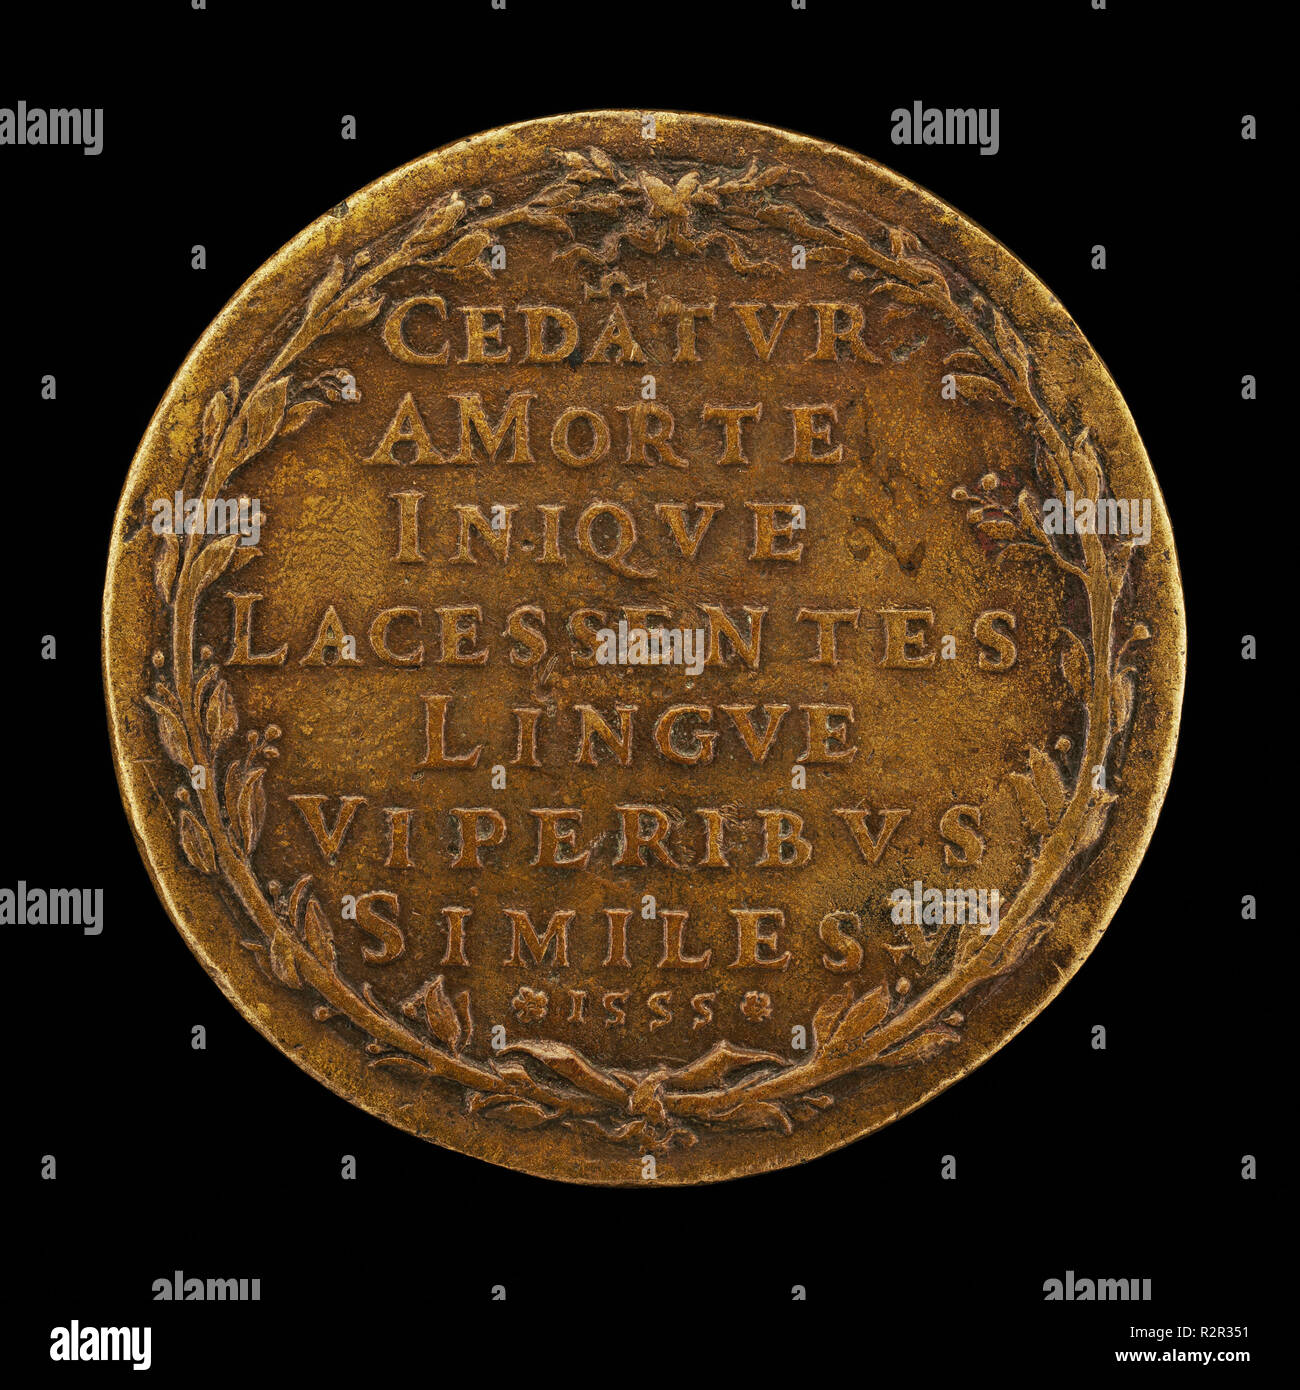 Inscription in a Laurel Wreath [reverse]. Dated: 1555. Dimensions: overall (diameter): 5.7 cm (2 1/4 in.)  gross weight: 83.76 gr (0.185 lb.)  axis: 12:00. Medium: bronze. Museum: National Gallery of Art, Washington DC. Author: Master I. A. V. F. Stock Photo